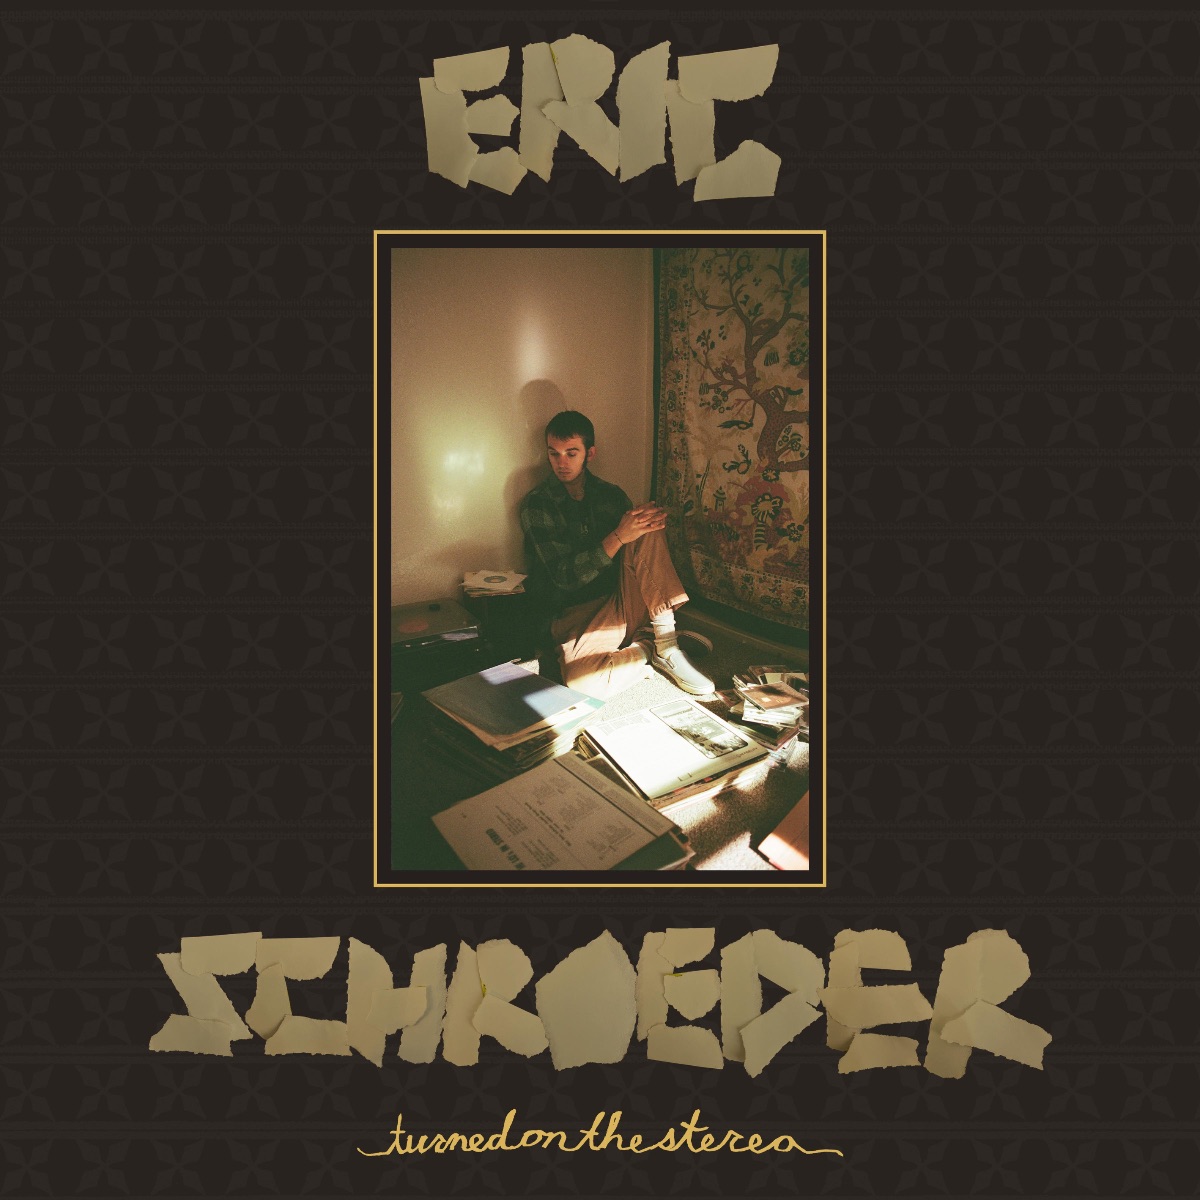 Eric Schroeder ‘Turned on the Stereo’ album artwork